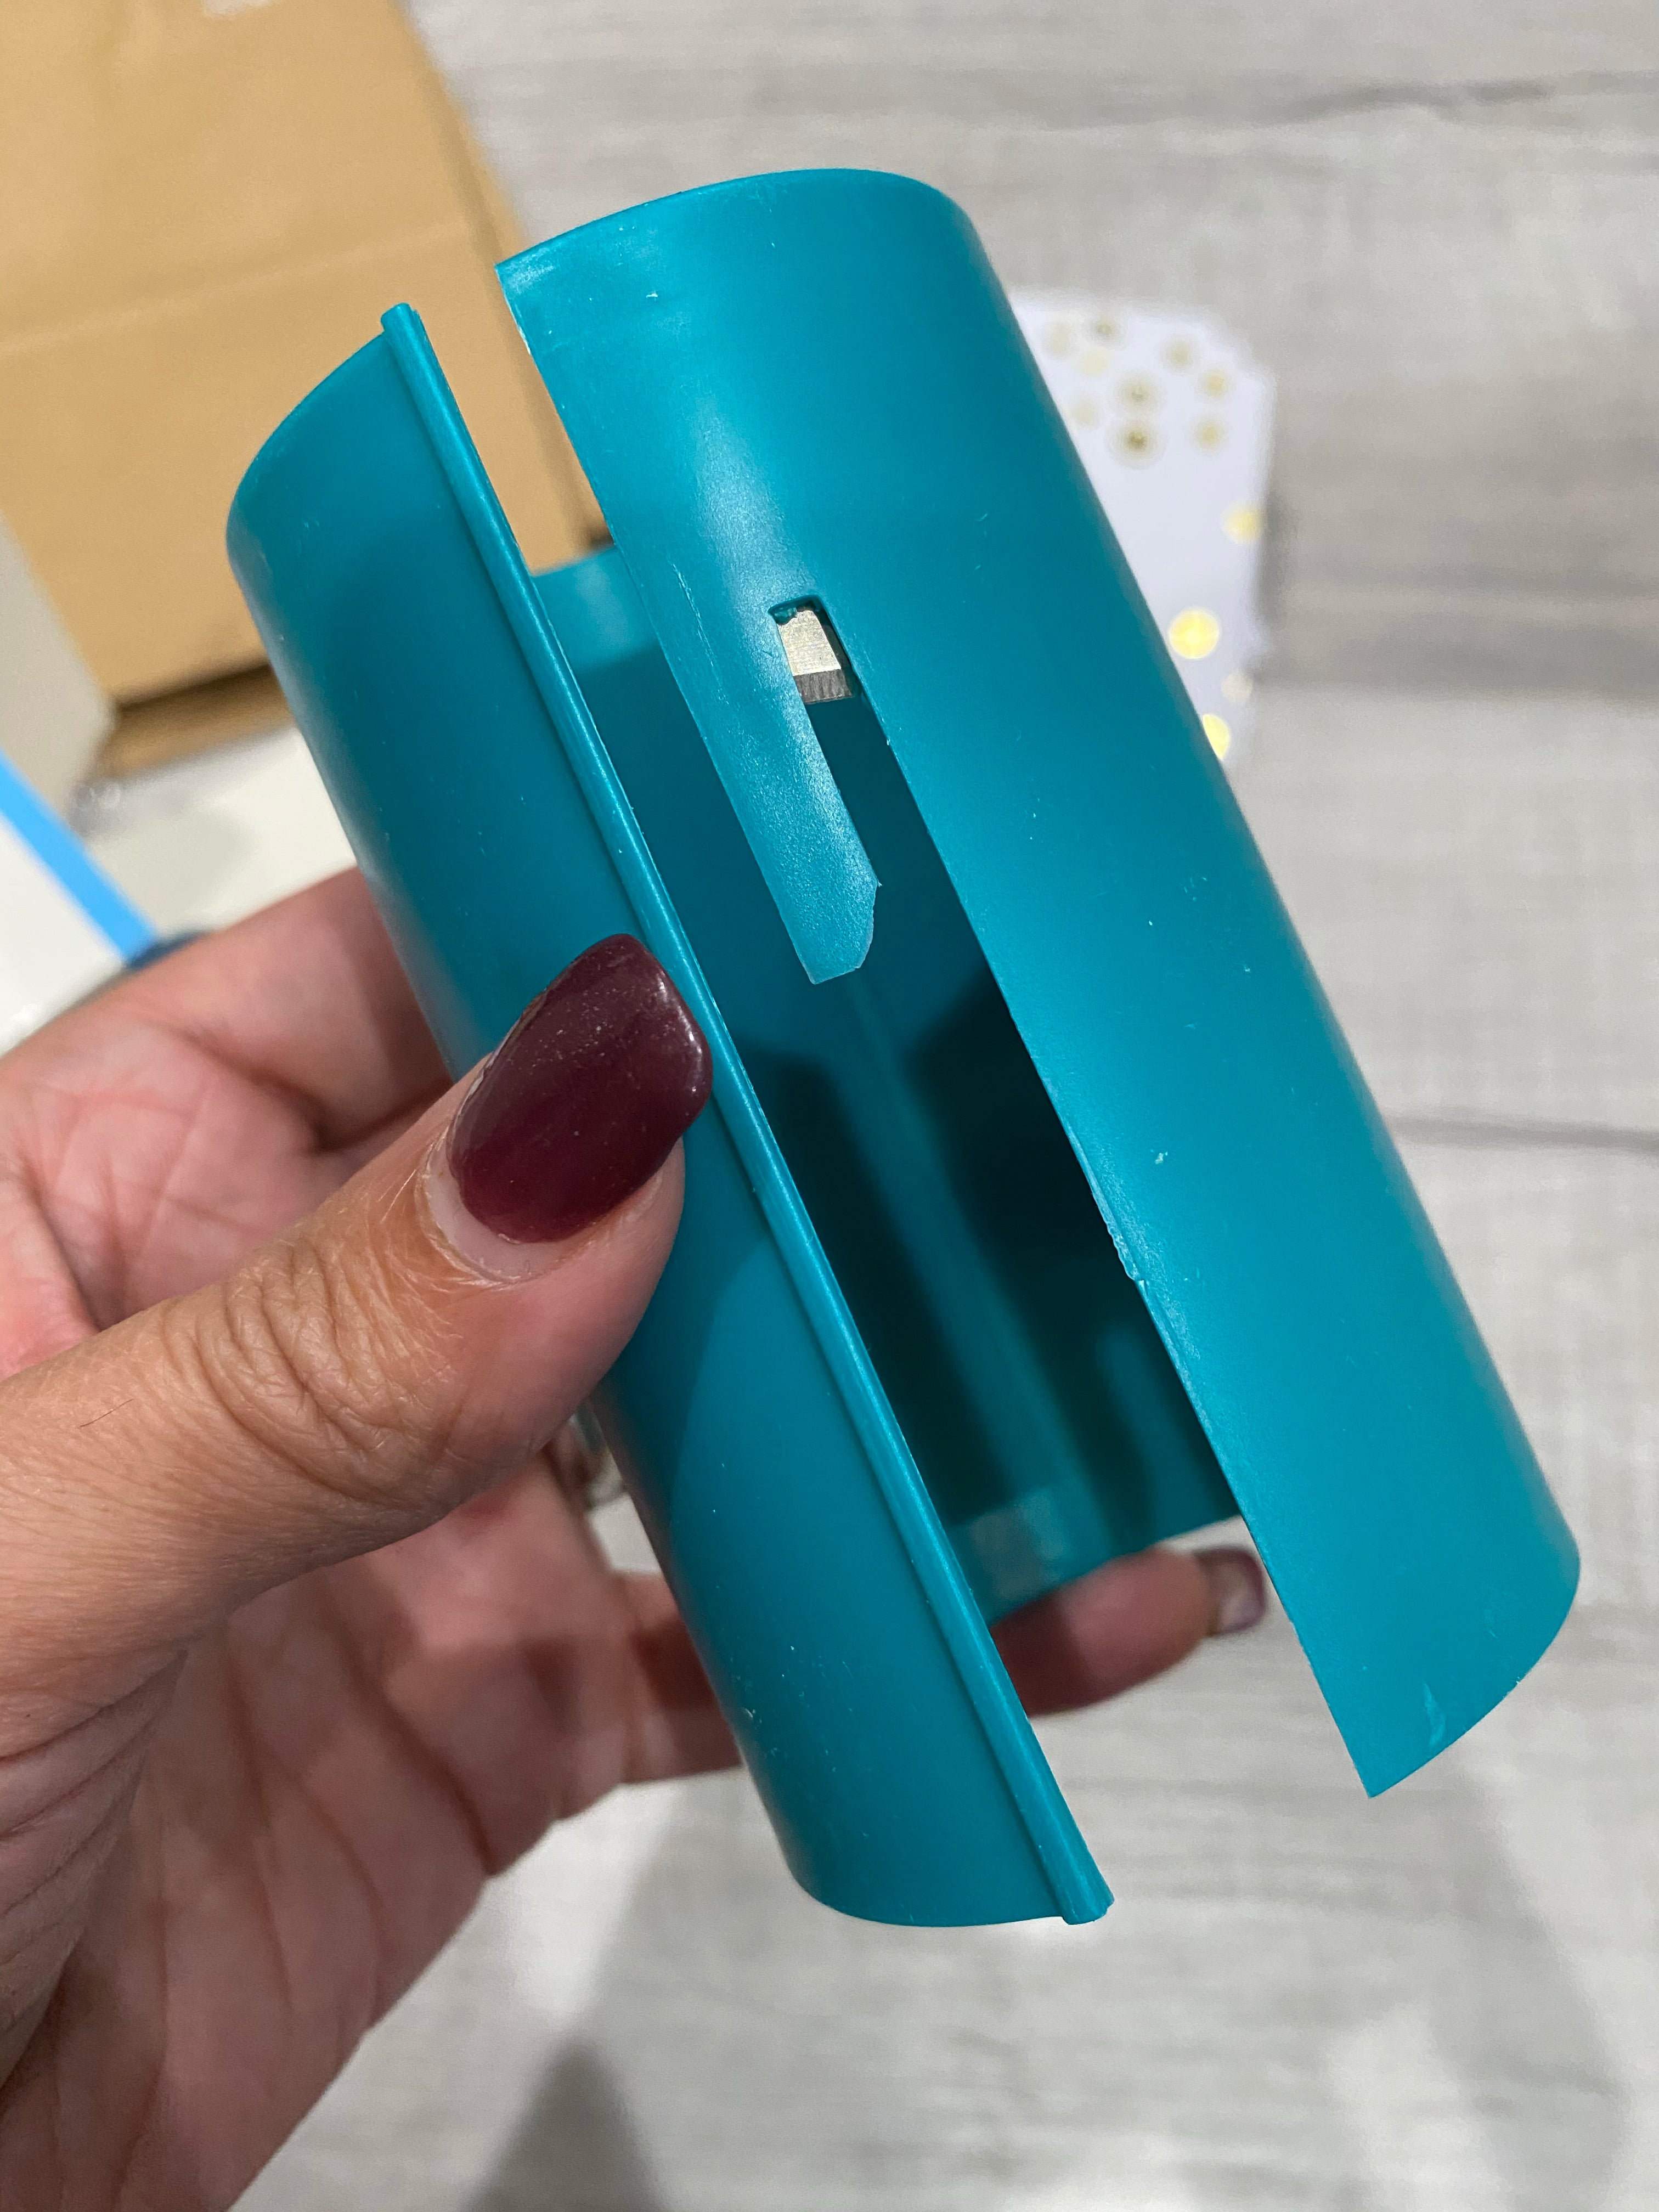 Wrapping paper cutter – Sips and Samples